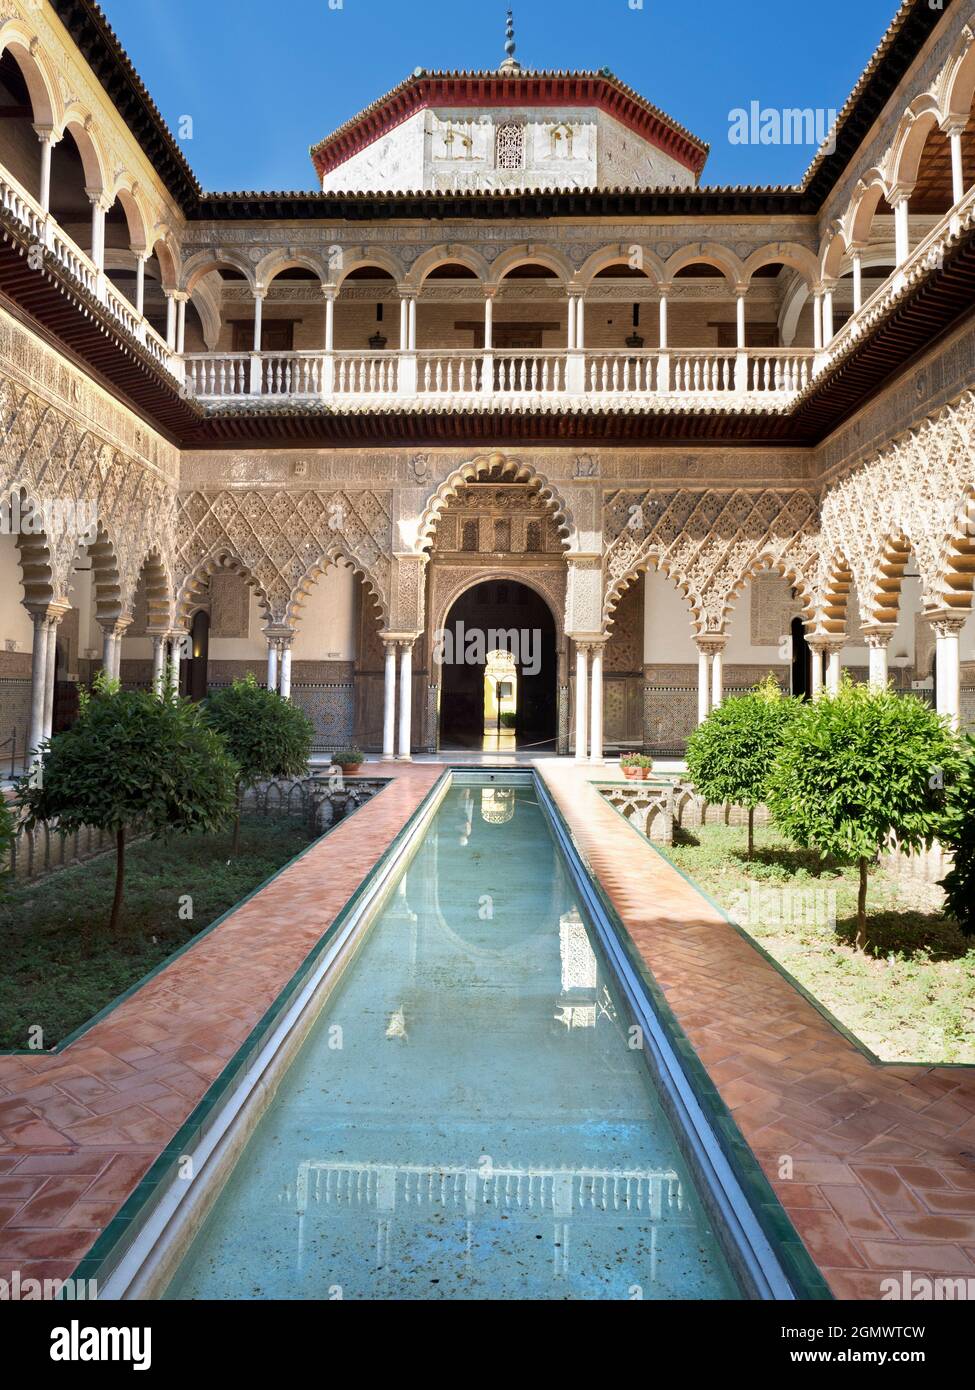 Seville, Spain - 18 July 2015; The Alcazar of Seville, Spain, is a beautiful and historic royal palace that was originally built by Moorish Kings in t Stock Photo